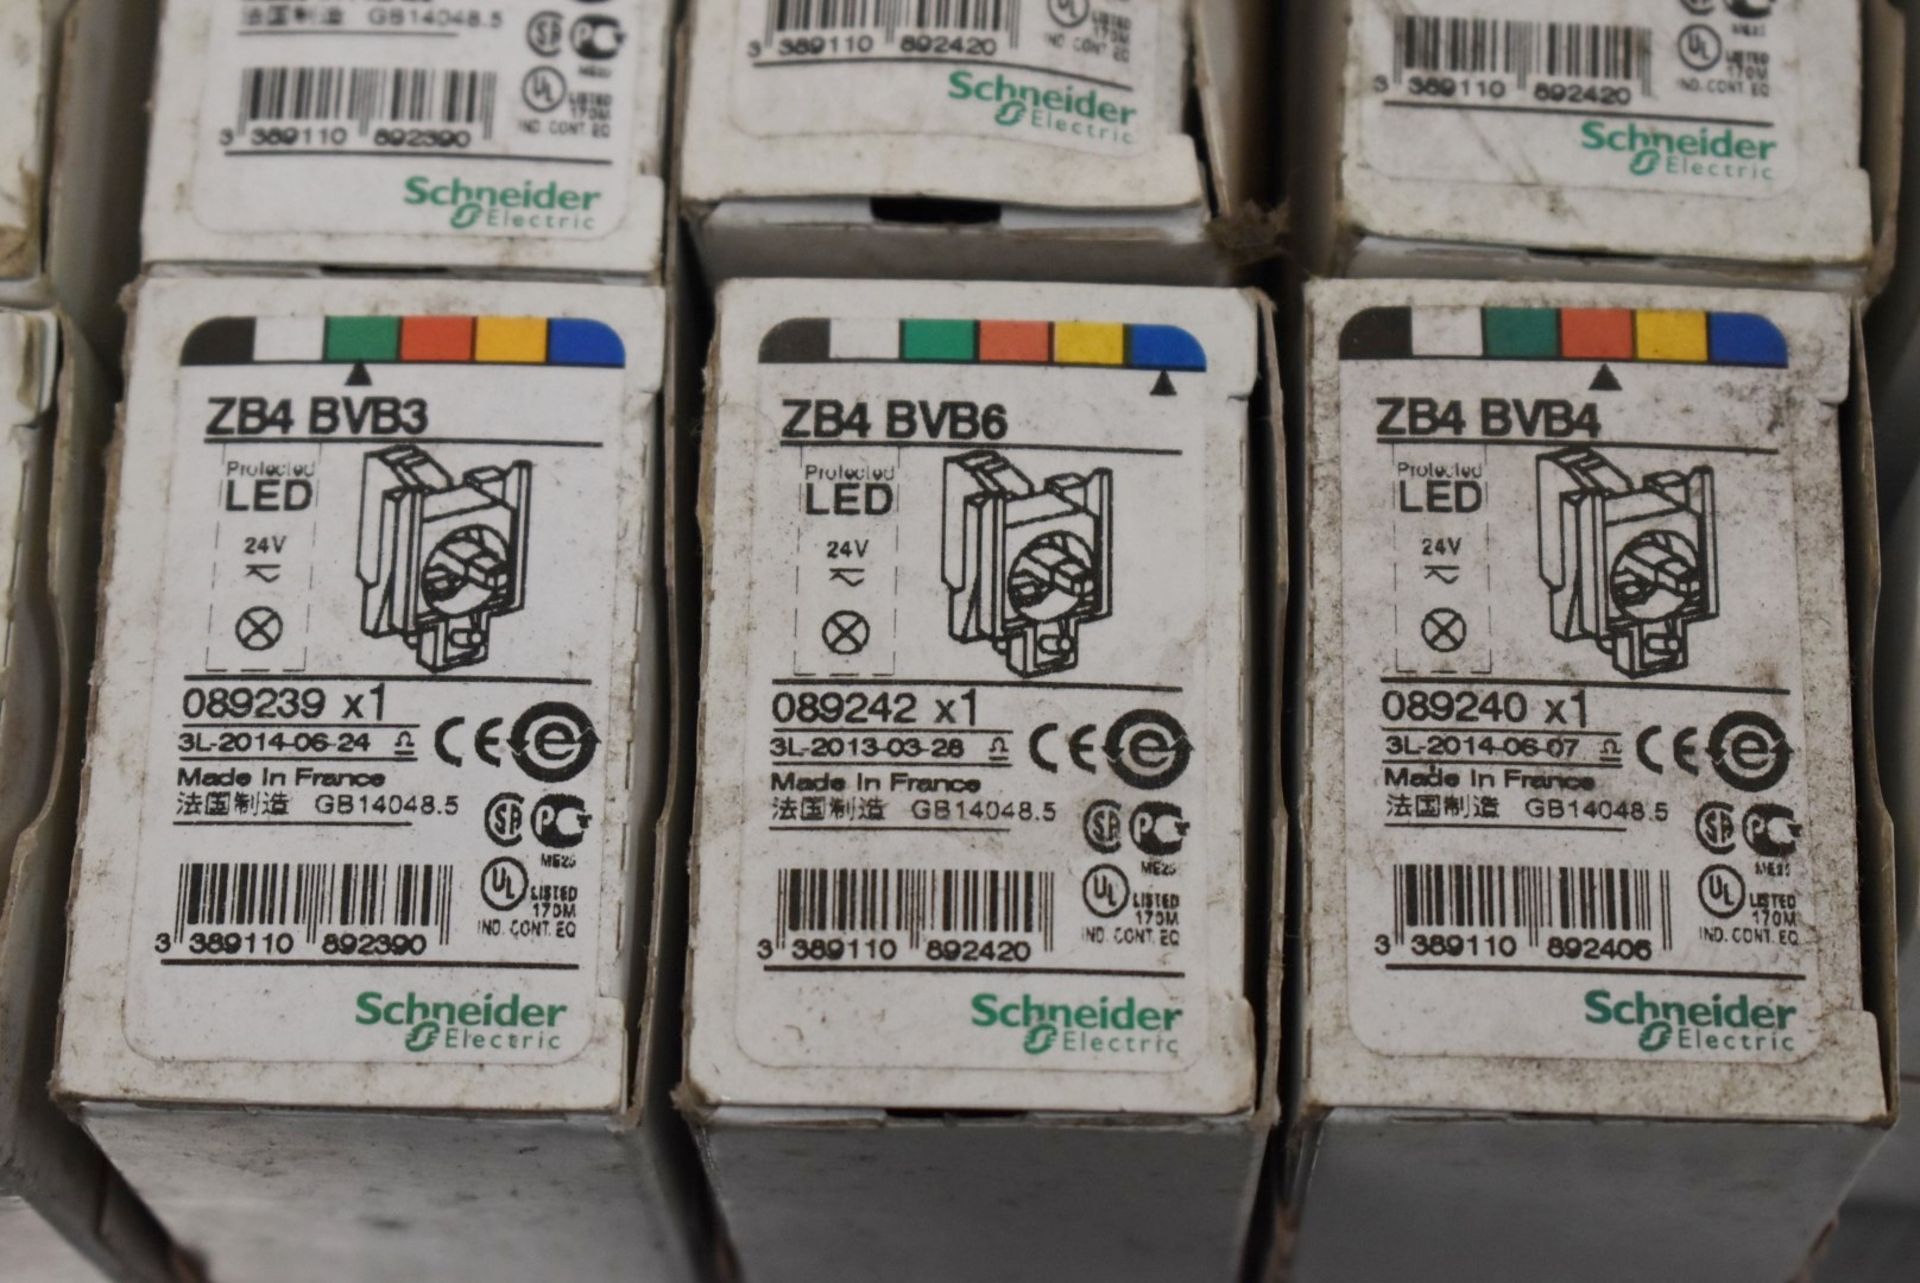 45 x Schneider Electric Harmony XB4 Light Blocks - New Boxed Stock - RRP £585 - Types Include: ZBA - Image 7 of 7